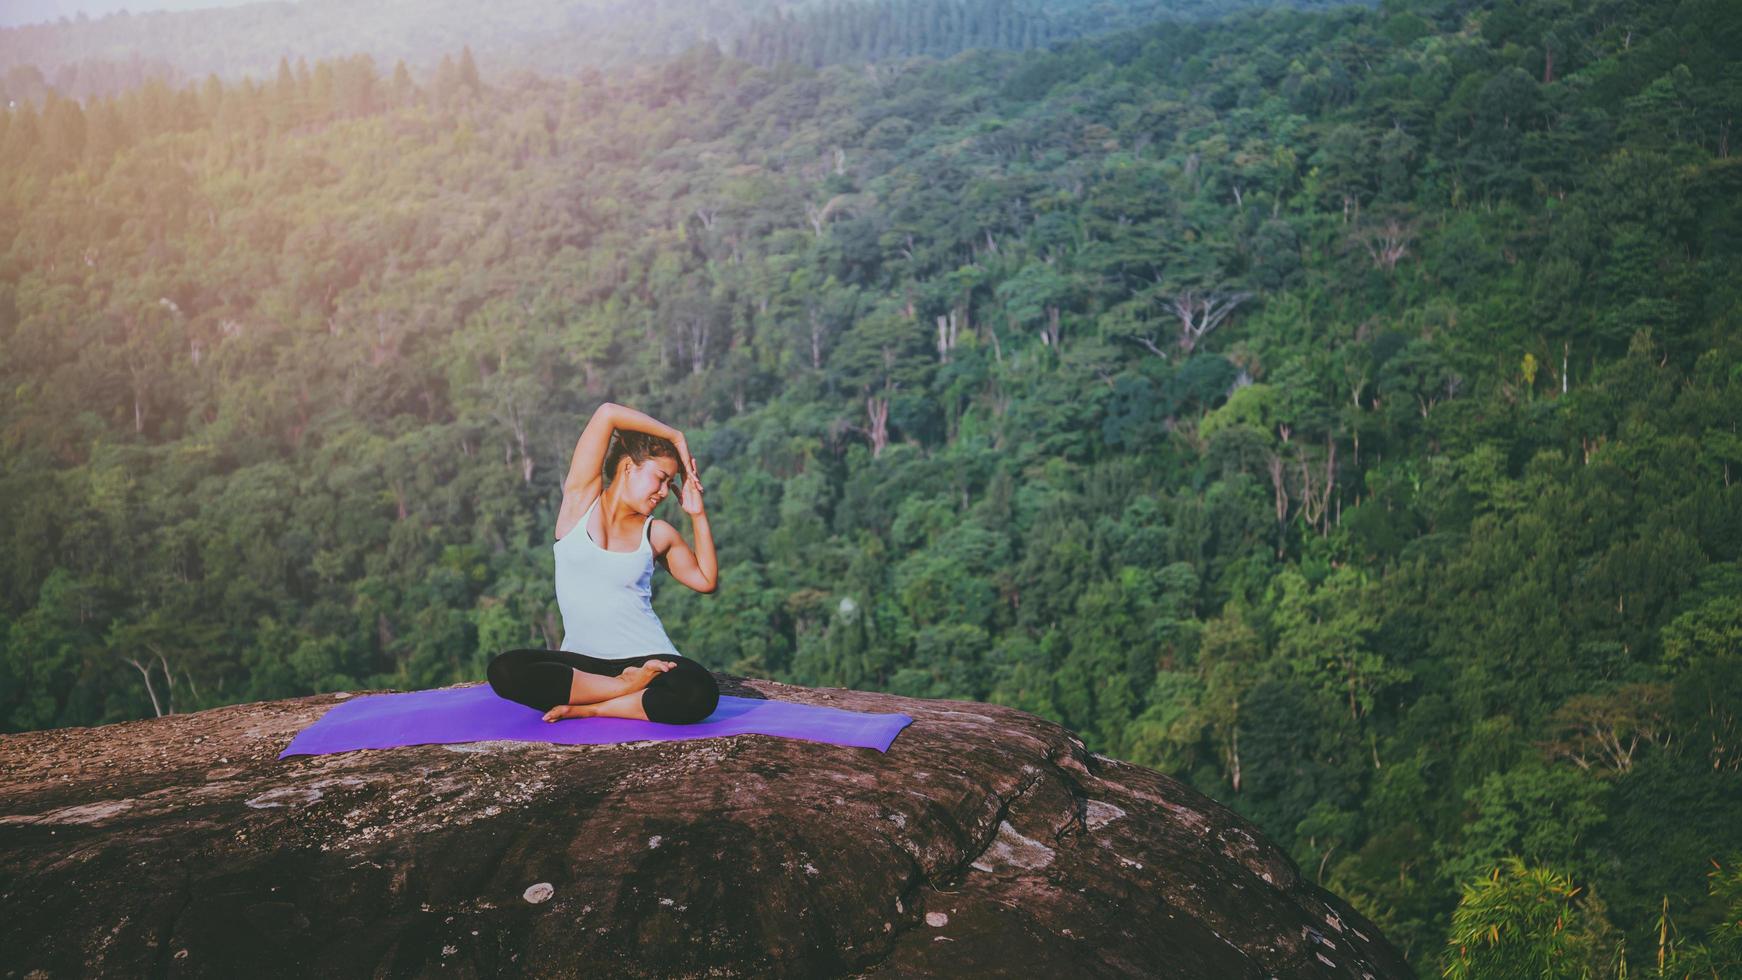 Asian women relax in the holiday. Play if yoga. On the Moutain rock cliff. Nature of mountain forests in Thailand photo